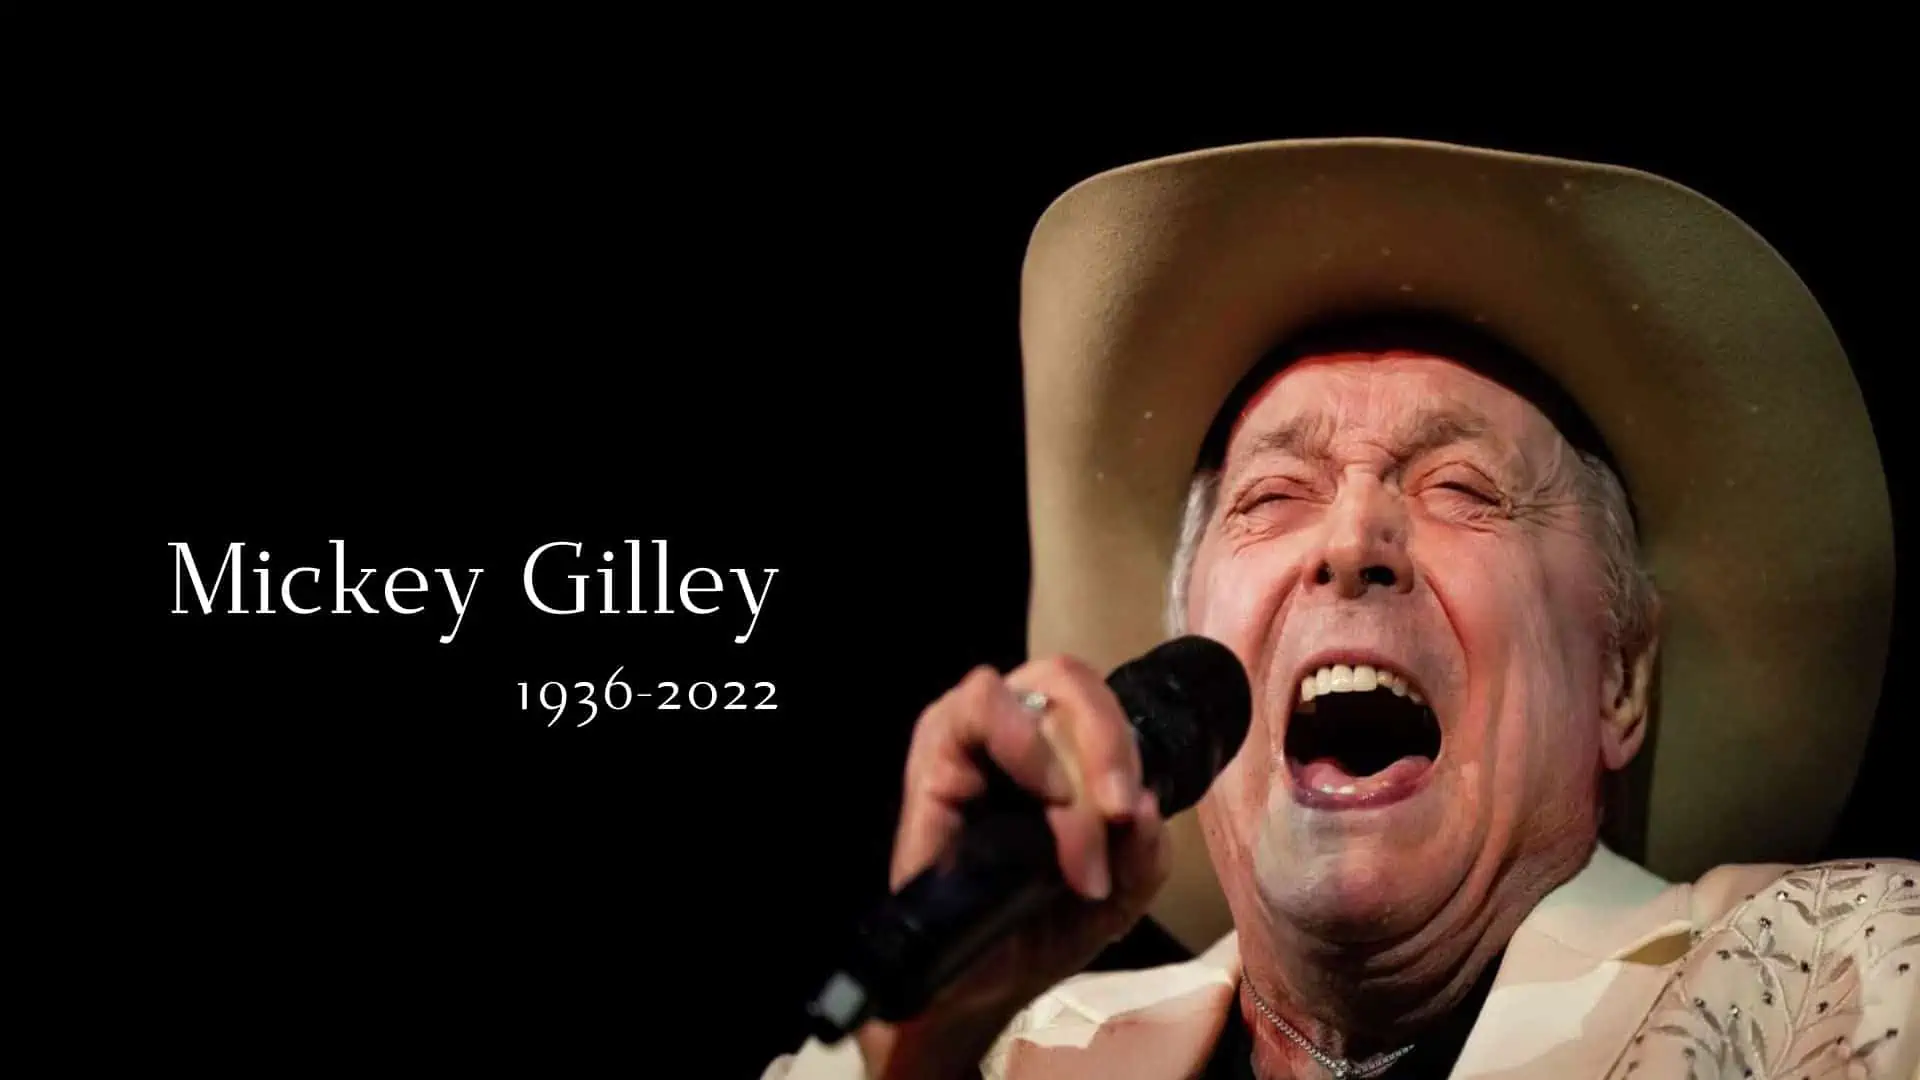 Mickey Gilley, the man who inspired 'Urban Cowboy', dies at 86